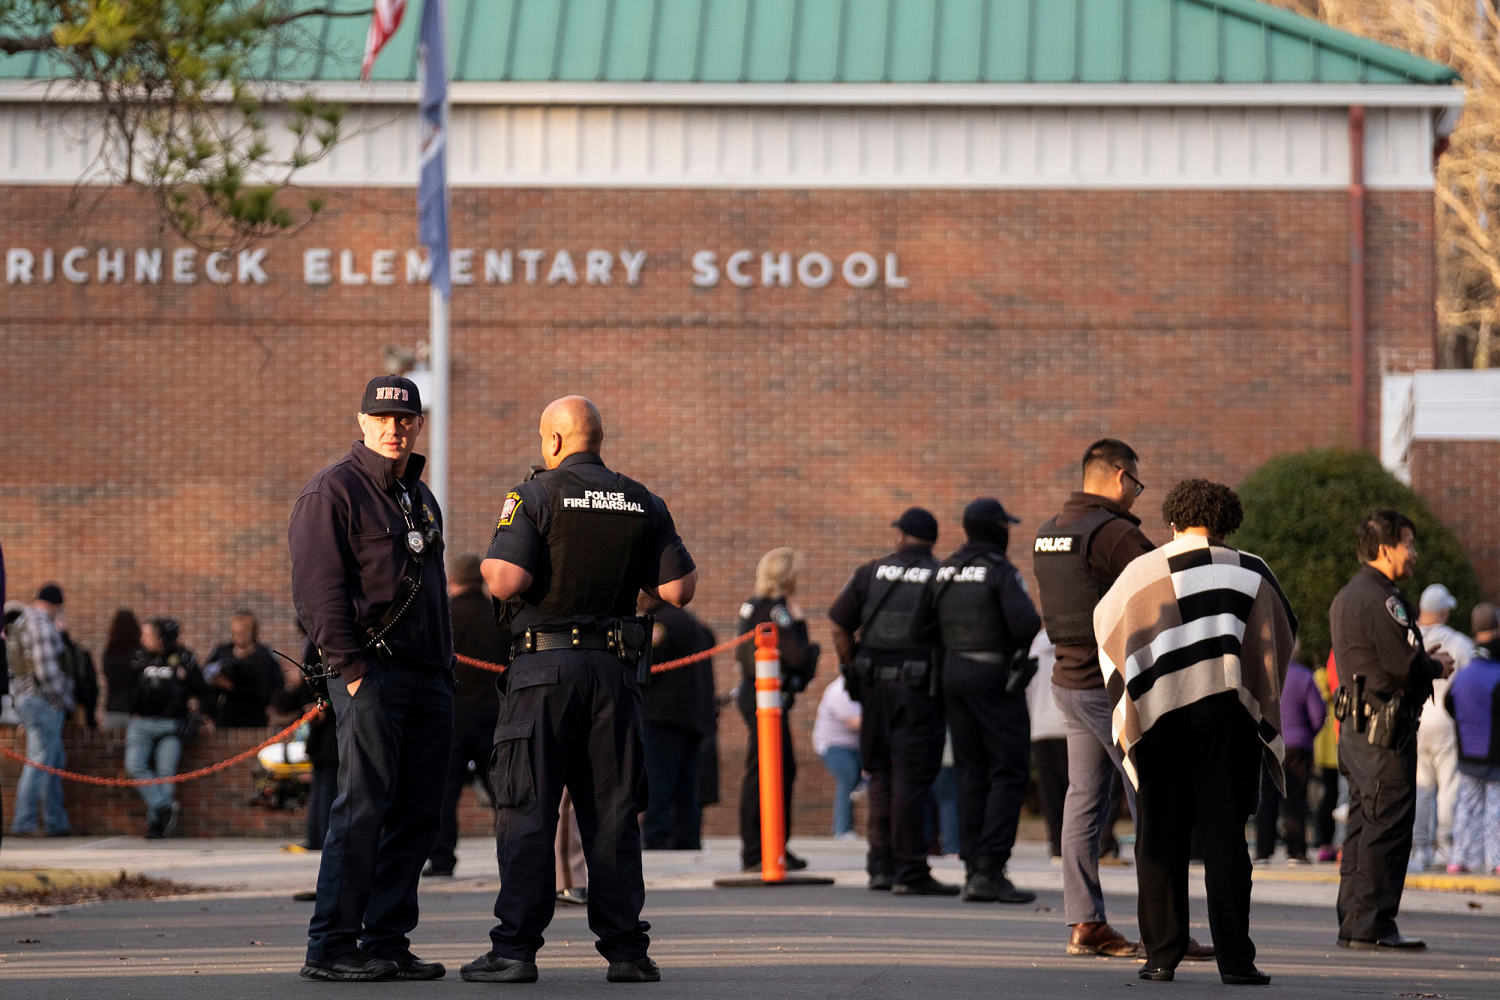 Former educator at Virginia school where 6-year-old shot teacher had ‘shocking’ lack of response, grand jury finds